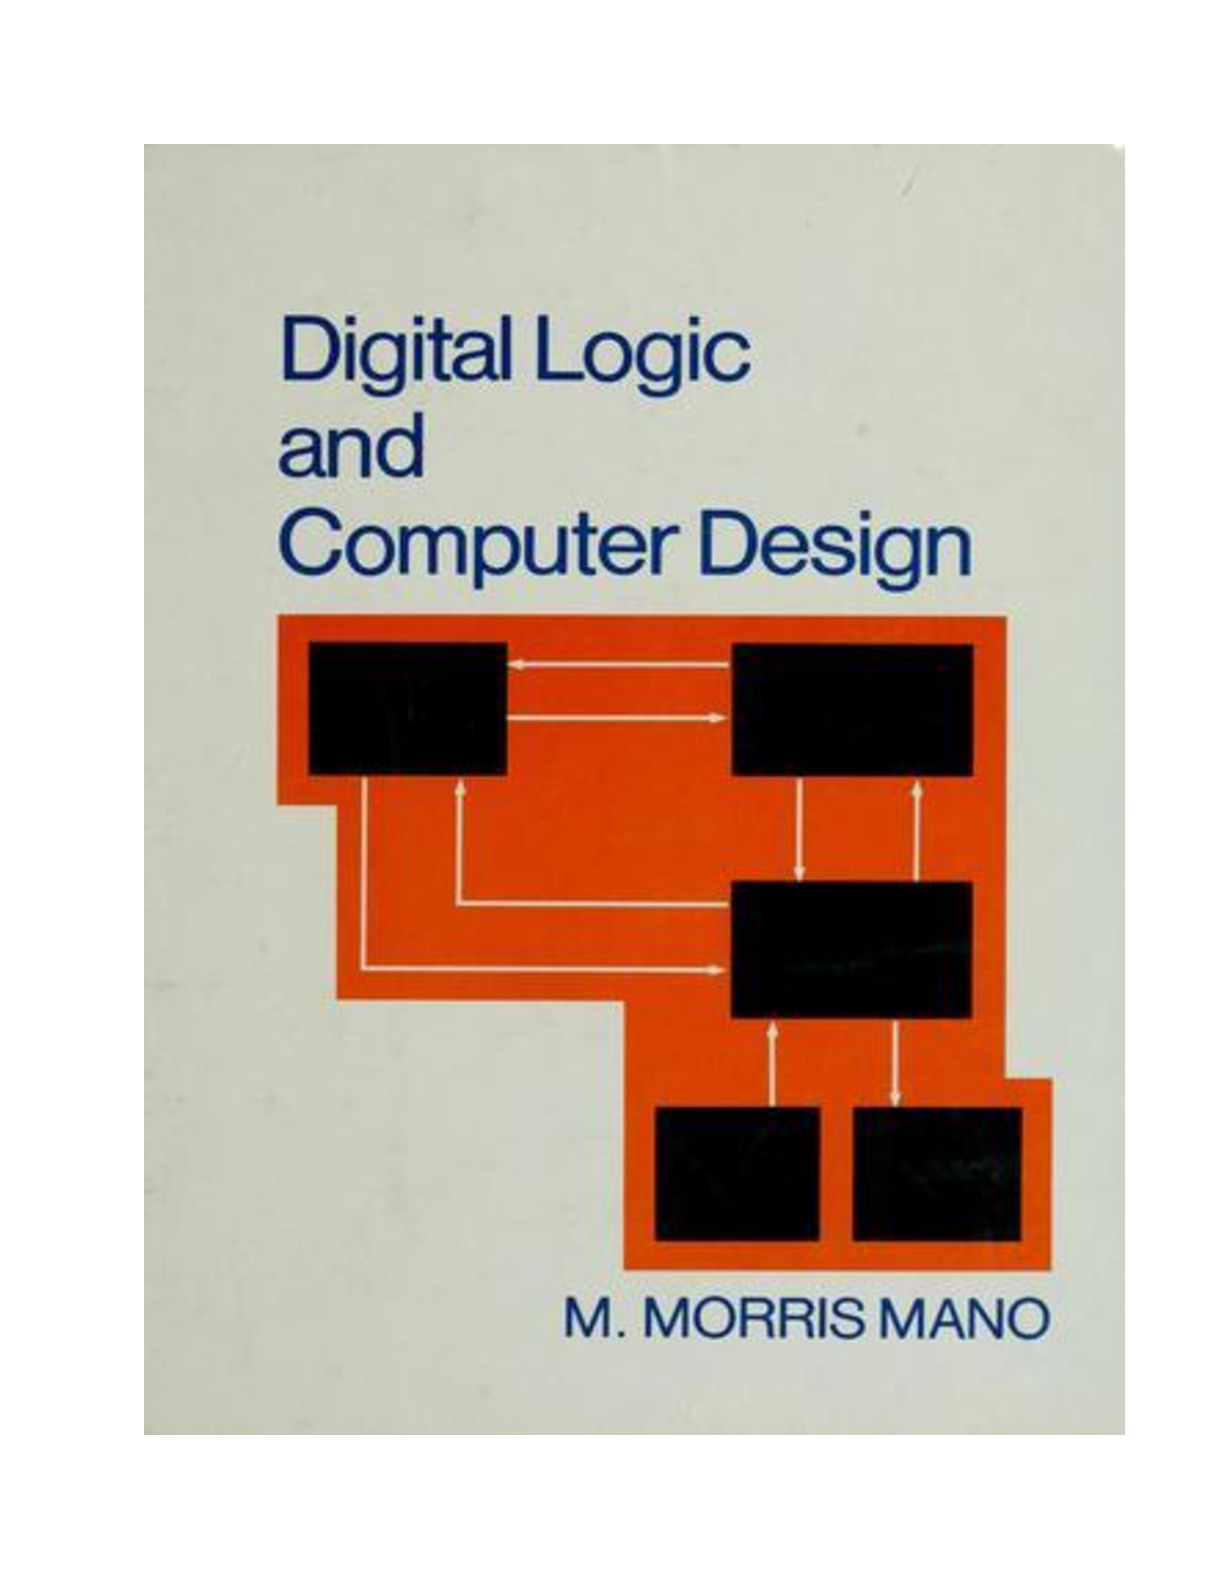 digital-logic-and-computer-design-by-m-morris-mano-2nd-edition